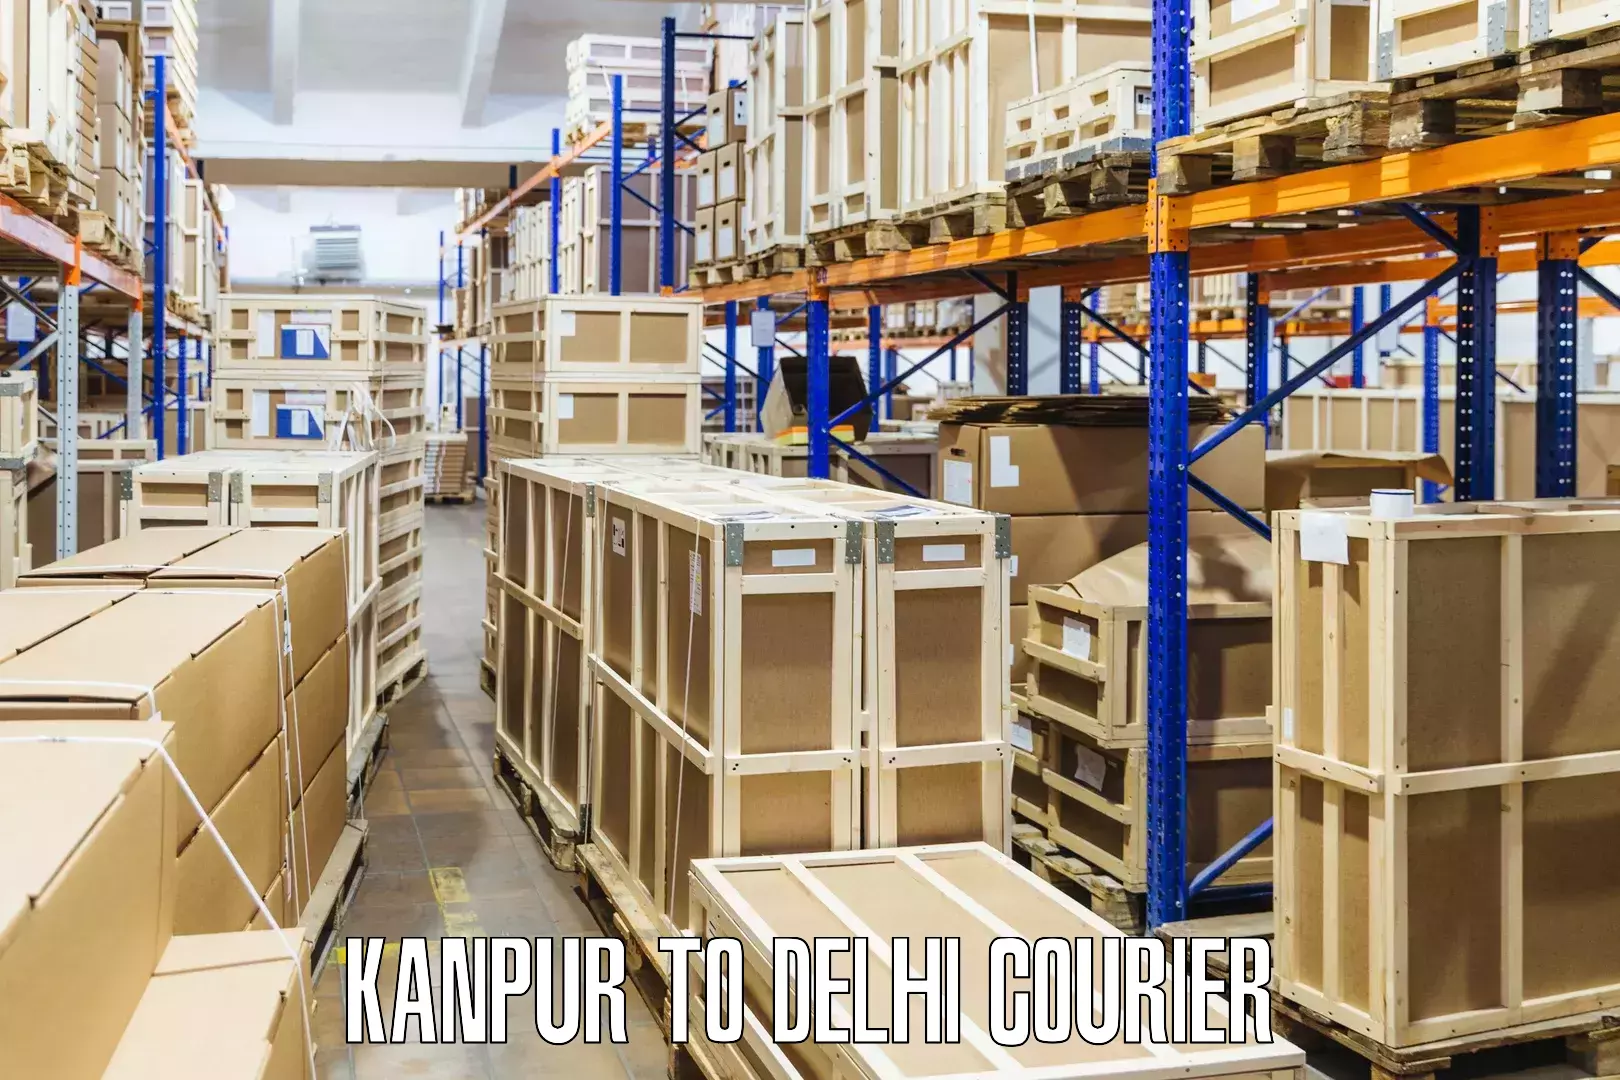 Reliable parcel services Kanpur to NCR